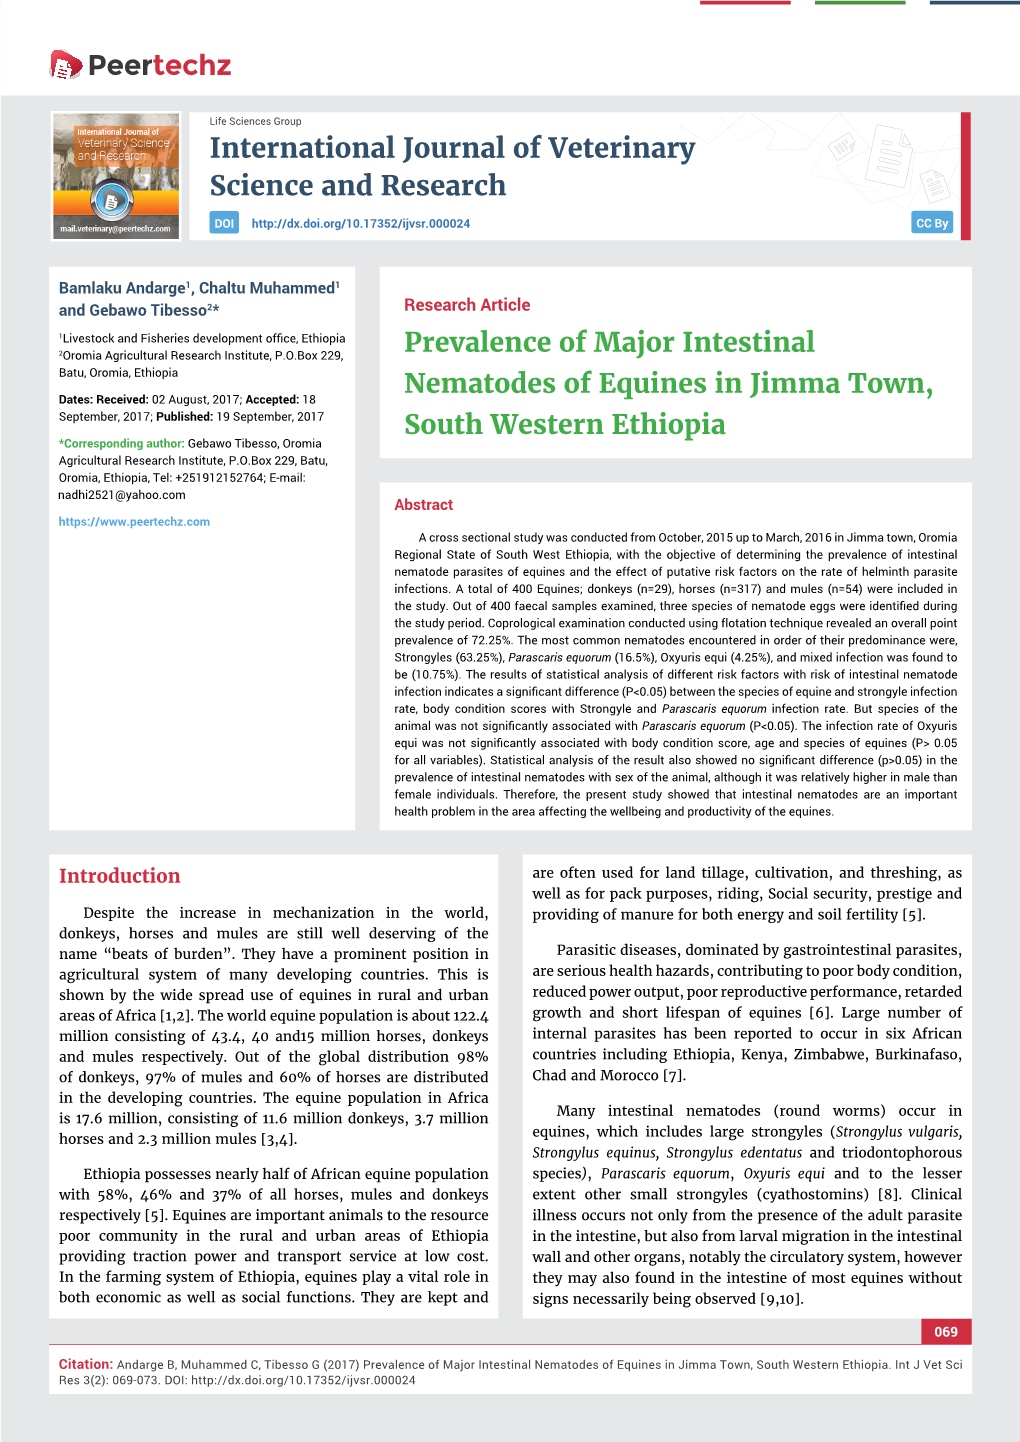 Prevalence of Major Intestinal Nematodes of Equines in Jimma Town, South Western Ethiopia